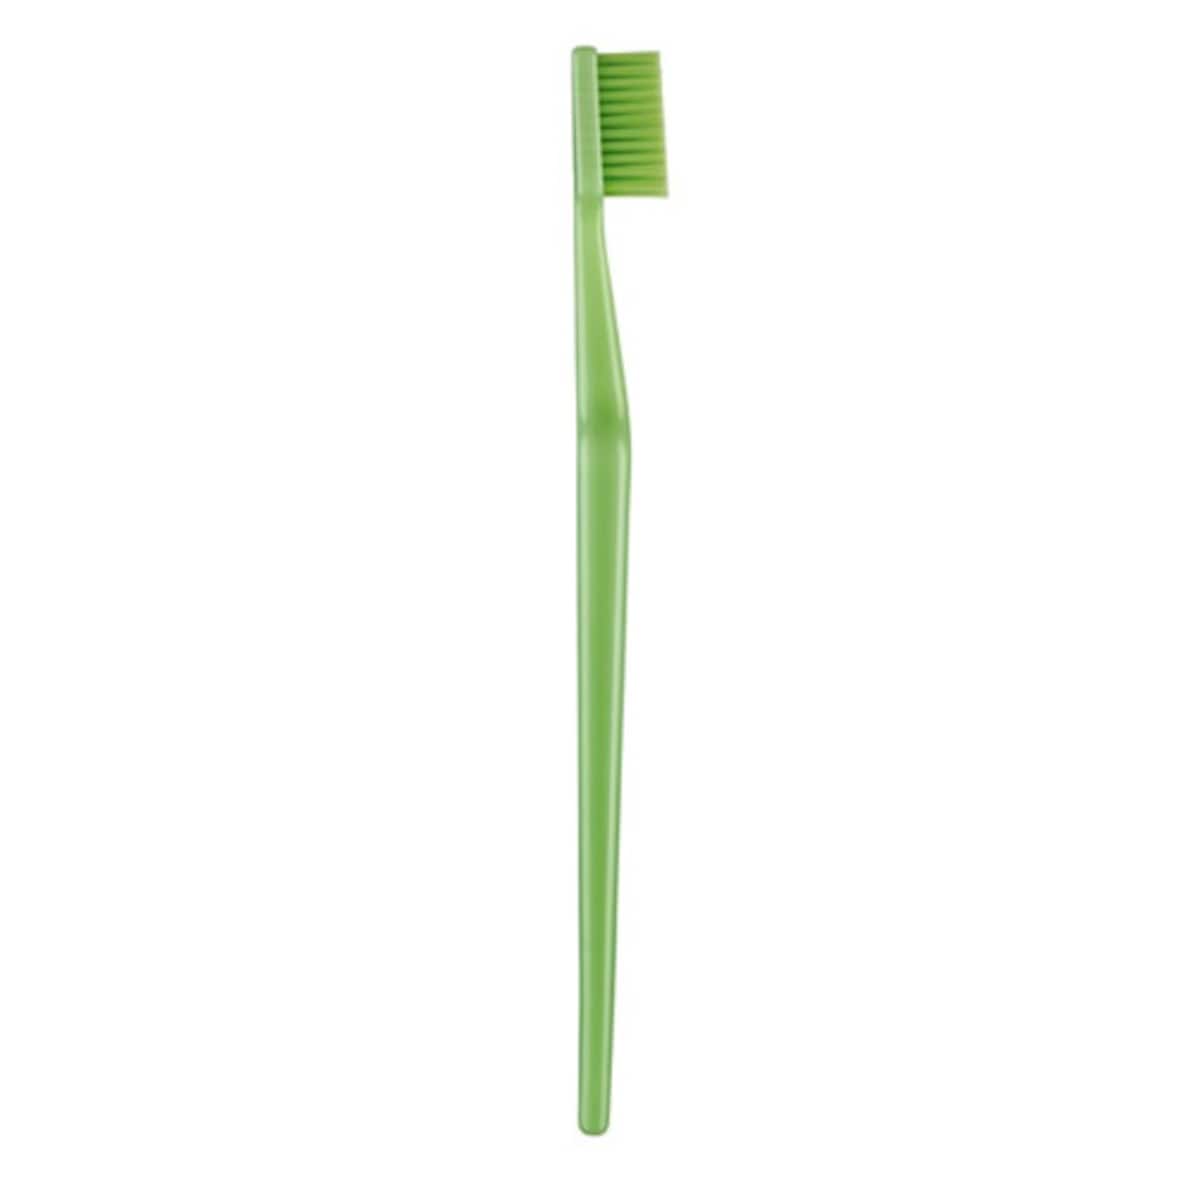 TePe Toothbrush GOOD Compact Soft 1 Pack